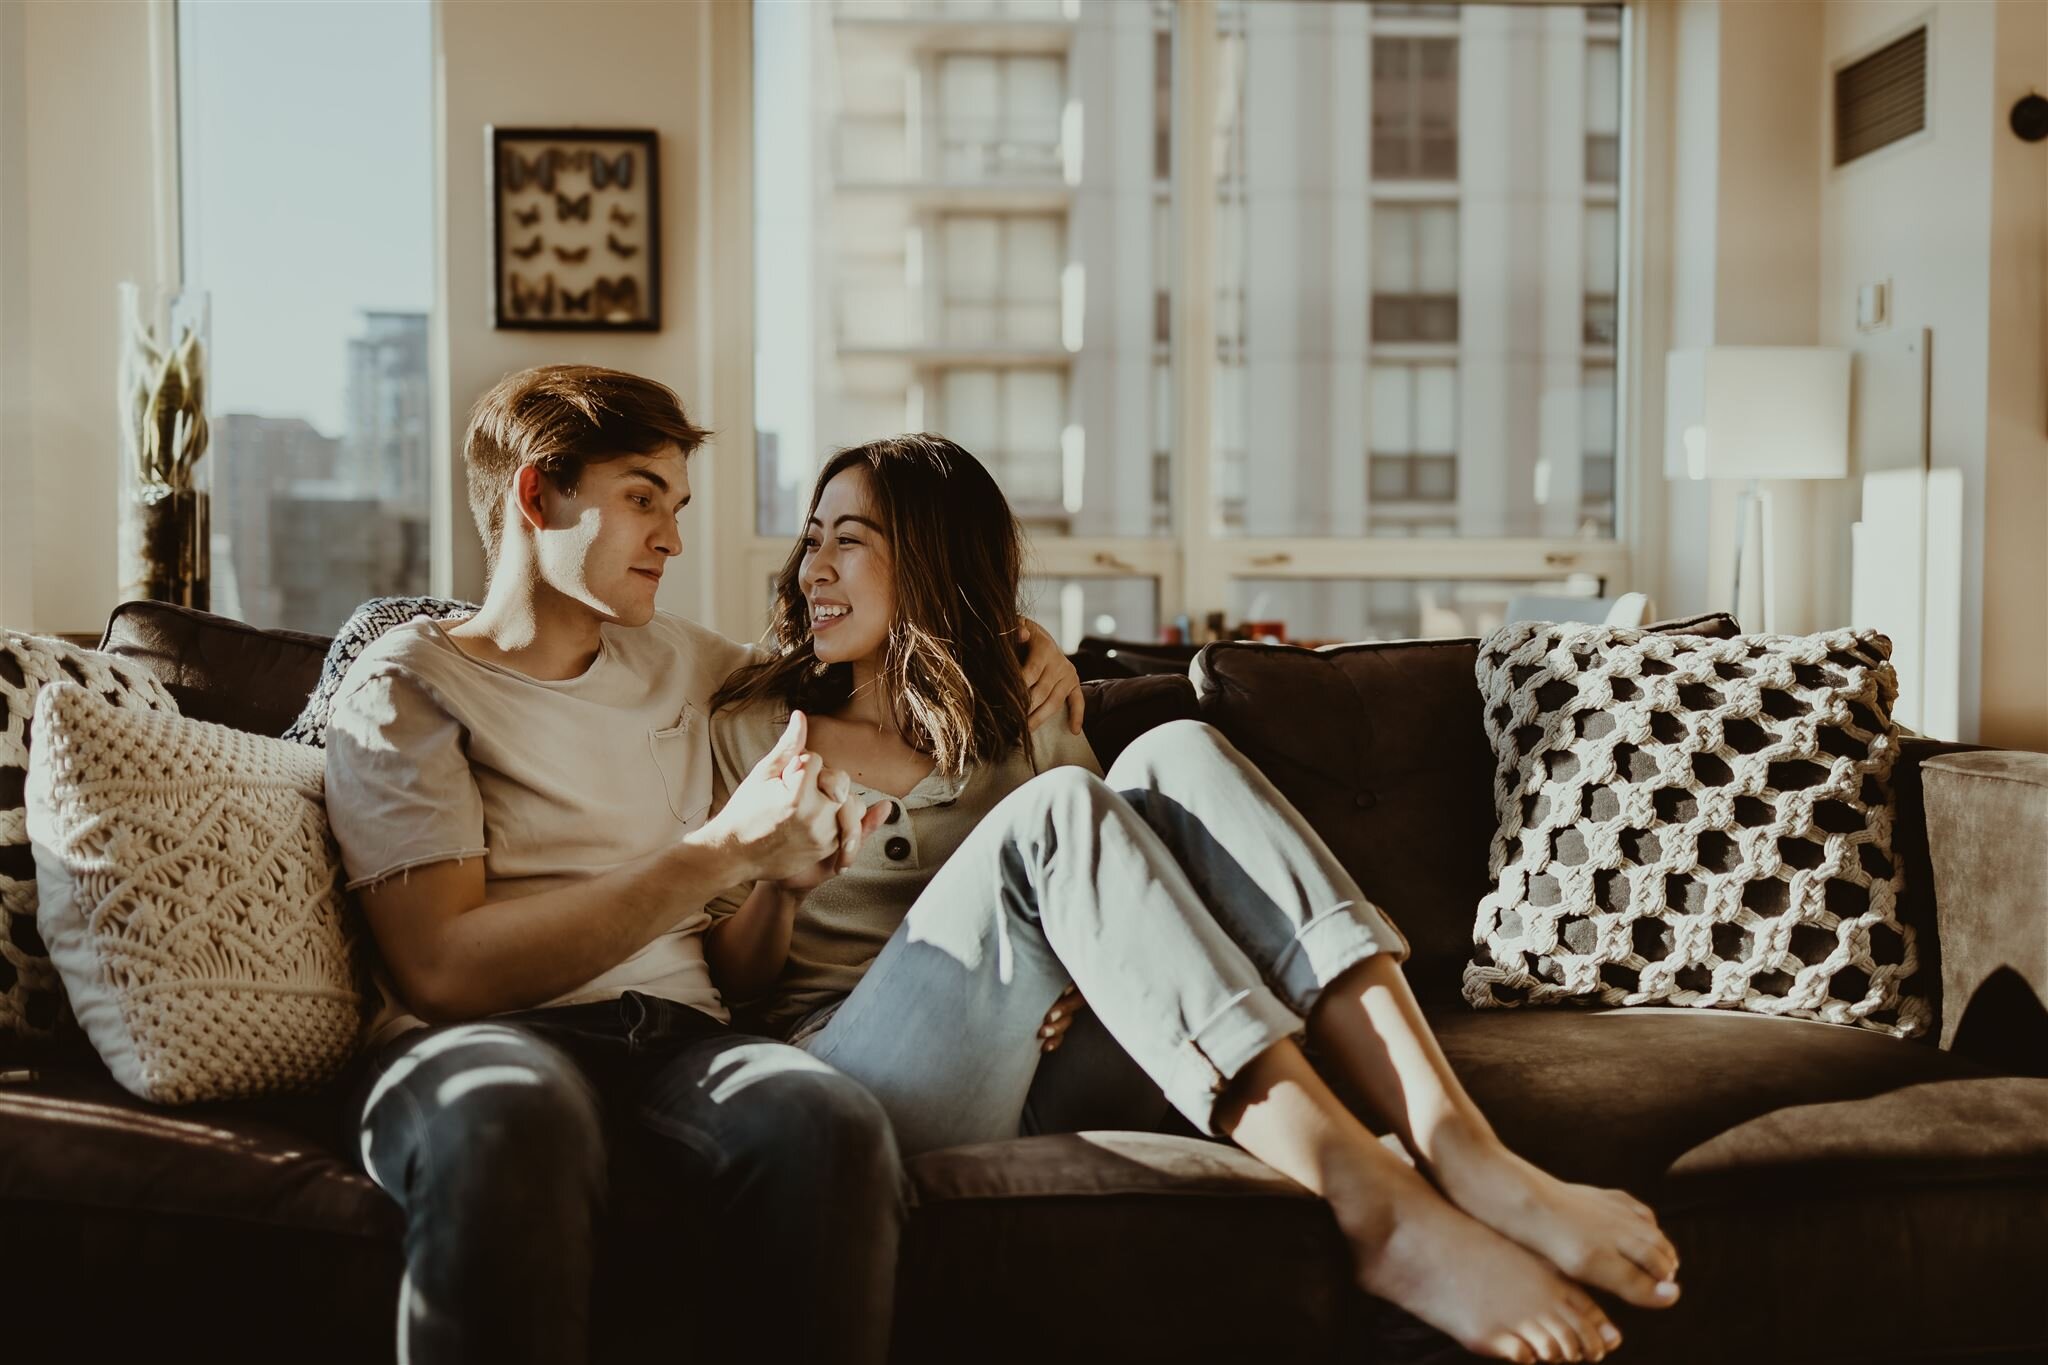 Cozy at Home Downtown Chicago Engagement Session captured by The Gernands Photography